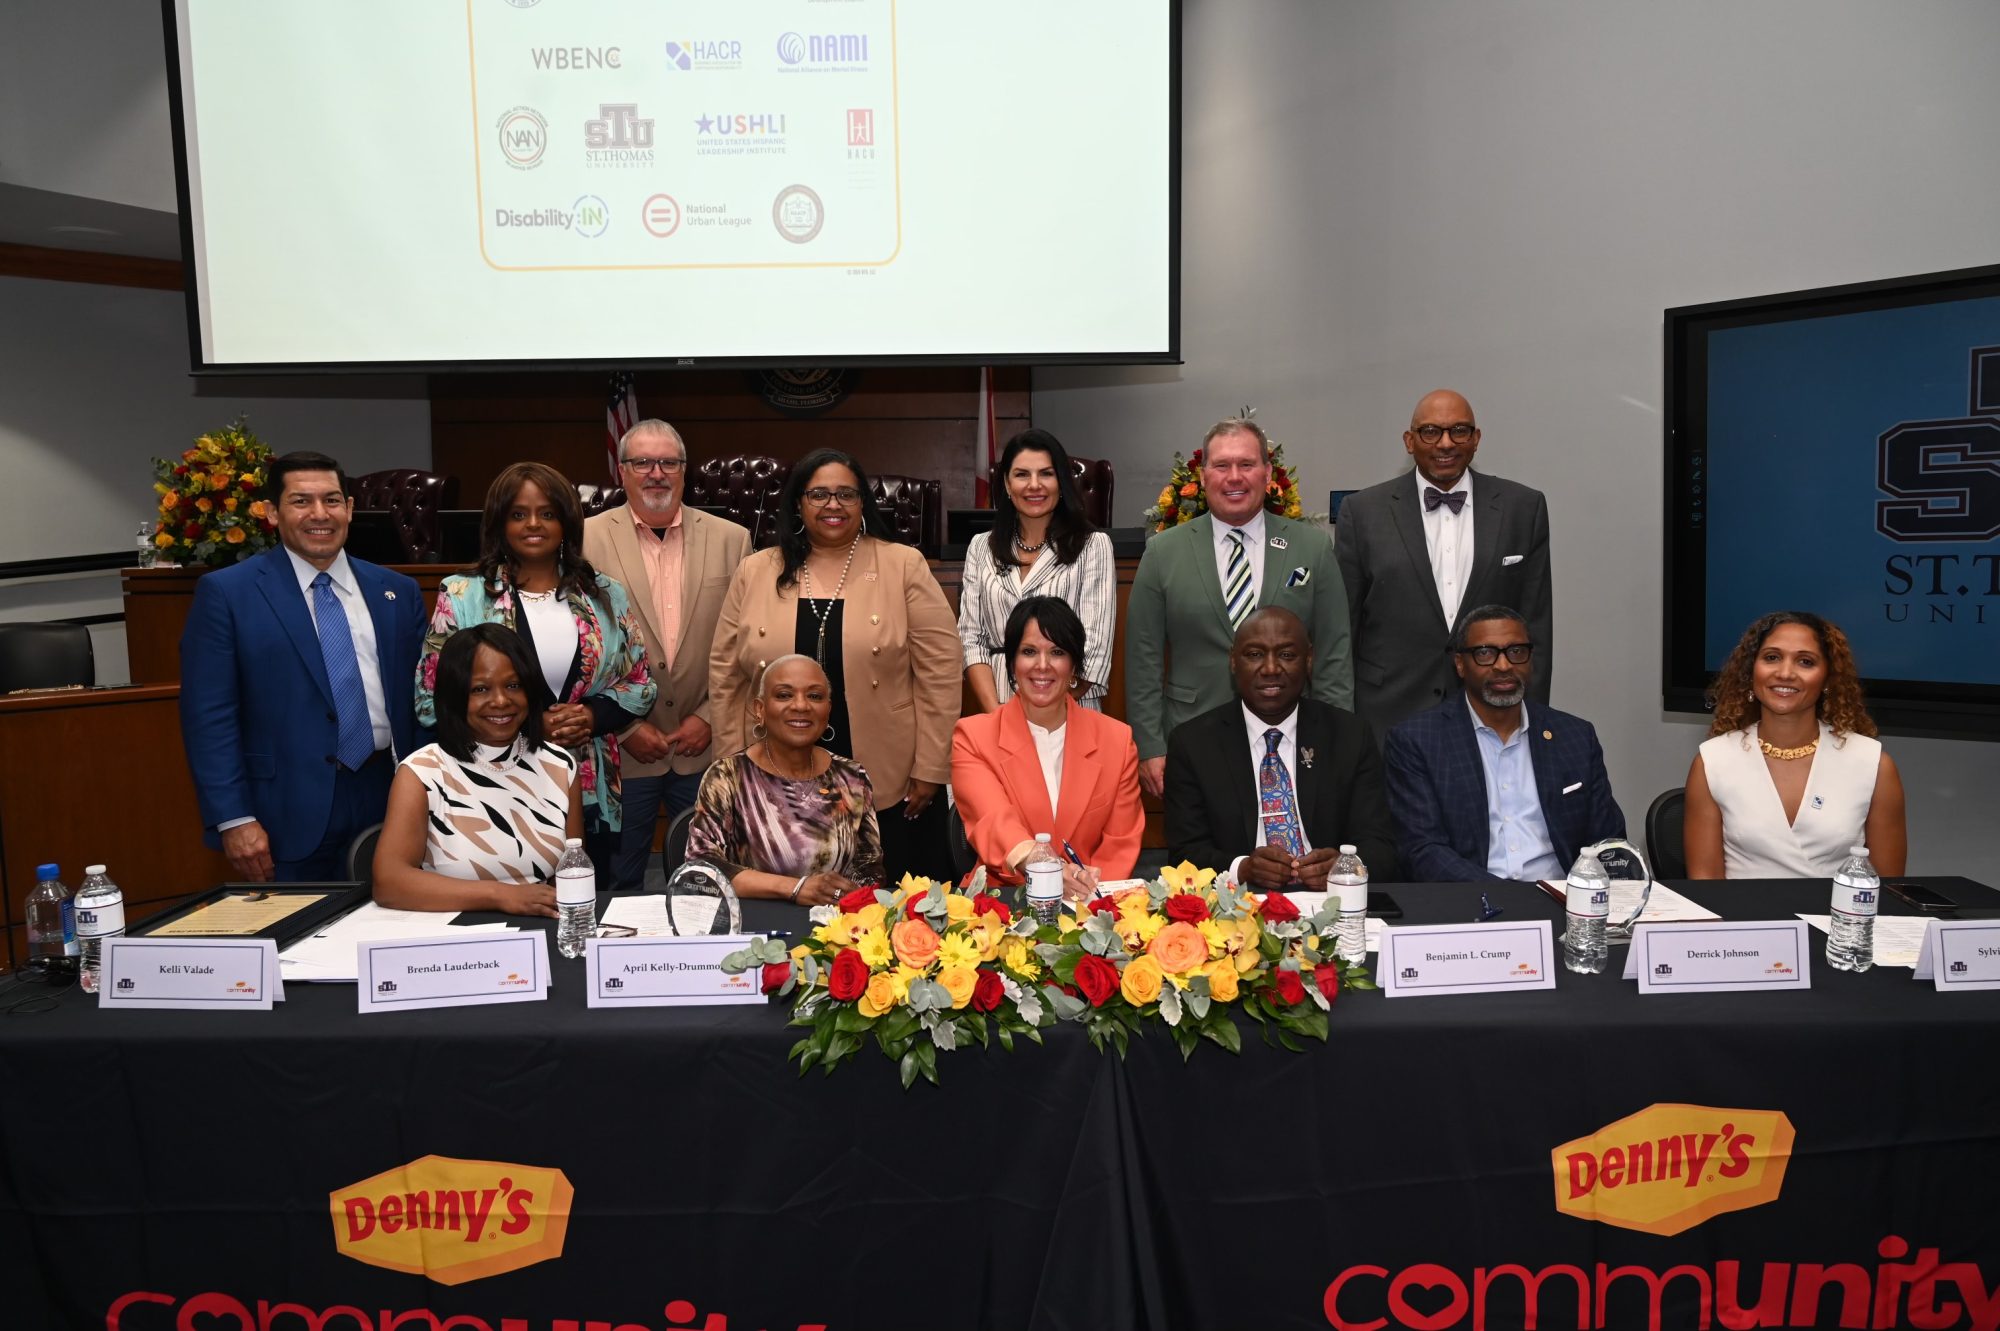 Denny’s recently announced the launch of it’s Community Alliance with a gift to the St. Thomas University Benjamin L. Crump College of Law. Representatives from Denny’s, NAACP, HACR, and the St. Thomas University Benjamin L. Crump College of Law were on hand for event. Seated (l-r): Gail Sharps Myers, Denny’s Executive Vice President, Chief Legal and Administrative Officer; Brenda J. Lauderback, Chair, Board of Directors, Denny’s Inc.; Kelli Valade, Denny’s CEO and President; Benjamin L. Crump; Derrick Johnson, President and CEO, NAACP; Sylvia Pérez Cash, Executive Vice President, Chief Operations Officer, HACR.
Second Row (l-r): Nader Talebzadeh, Denny’s Director of International Operations; Fasika Melaku-Peterson, Denny’s Senior Vice President, Chief Learning and Development Officer; Michael Whitacre, Denny’s Director of Franchise Operations; April Kelly-Drummond, Denny’s Vice President, Chief Inclusion and Community Engagement Officer; Dean Tarika Nunez-Navarro, St. Thomas University, Benjamin L. Crump College of Law; President David A. Armstrong, St. Thomas University; Randy Brown, Denny’s Senior Manager, Business Diversity.